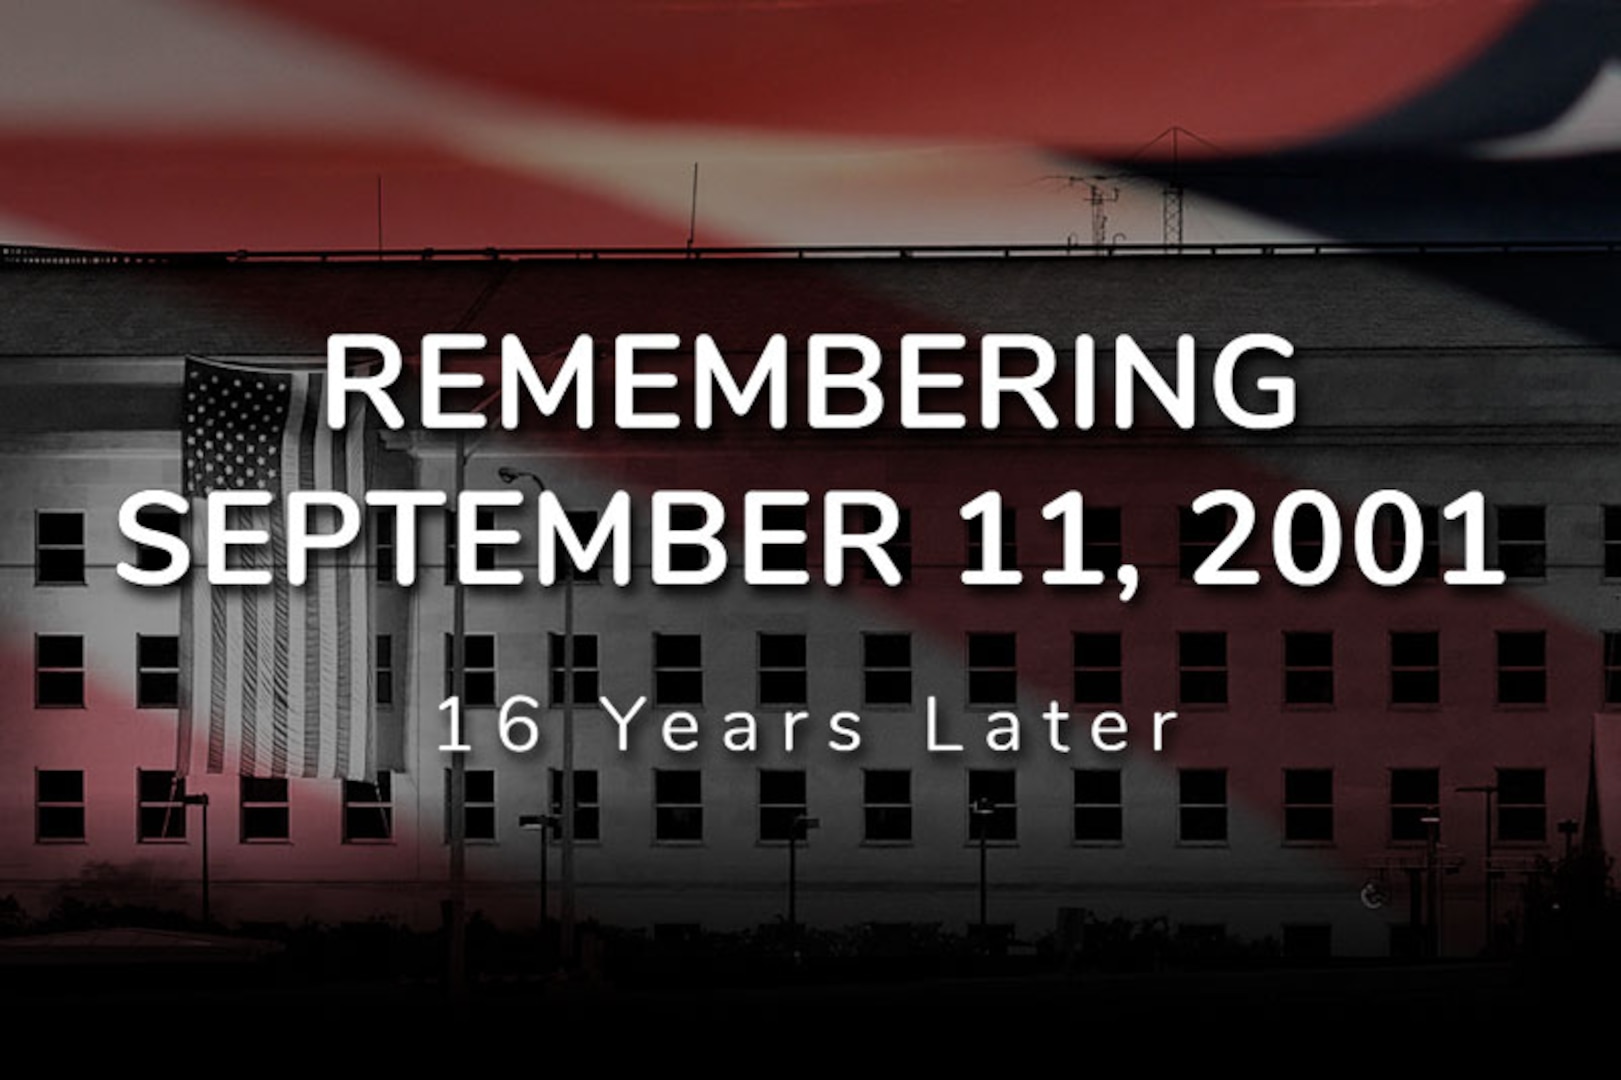 A banner graphic for Remembering September 11, 2001 - 16 Years Later